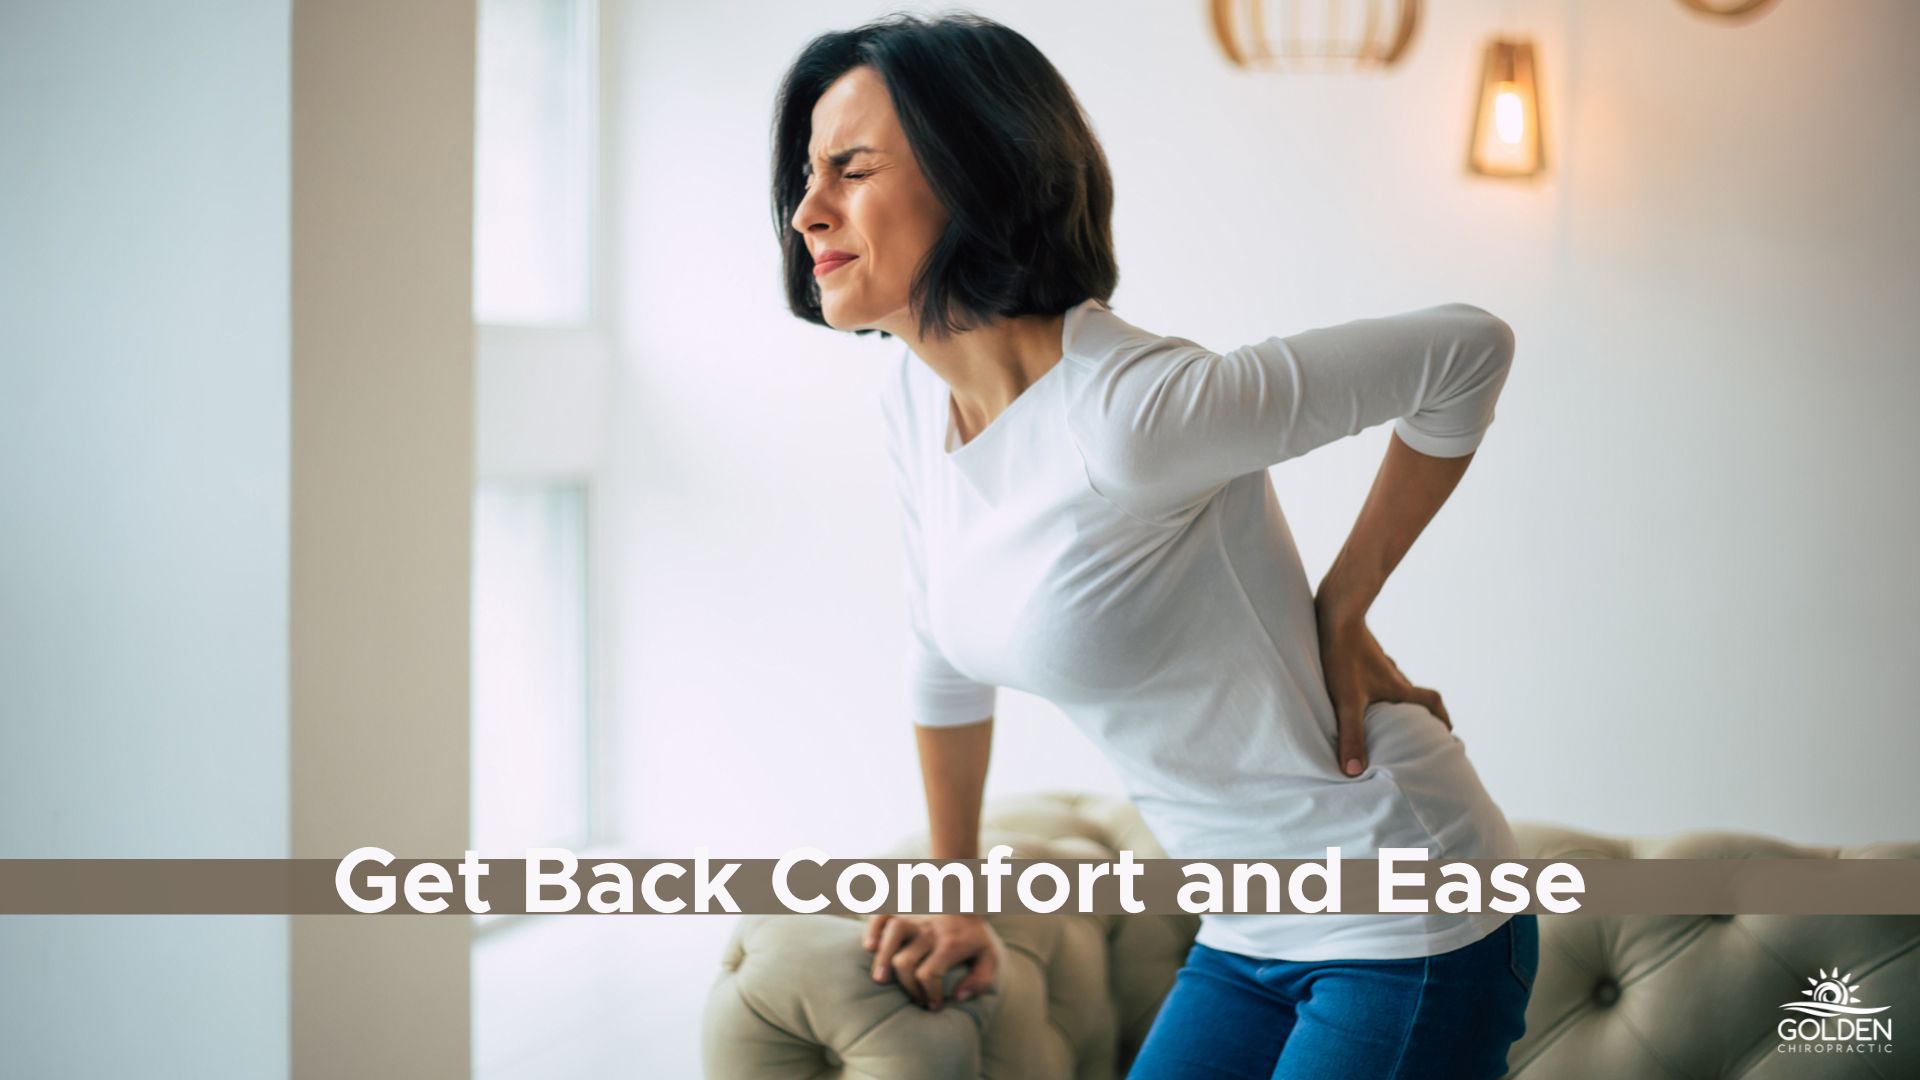 Middle age woman clutching her lower back and grimacing in pain